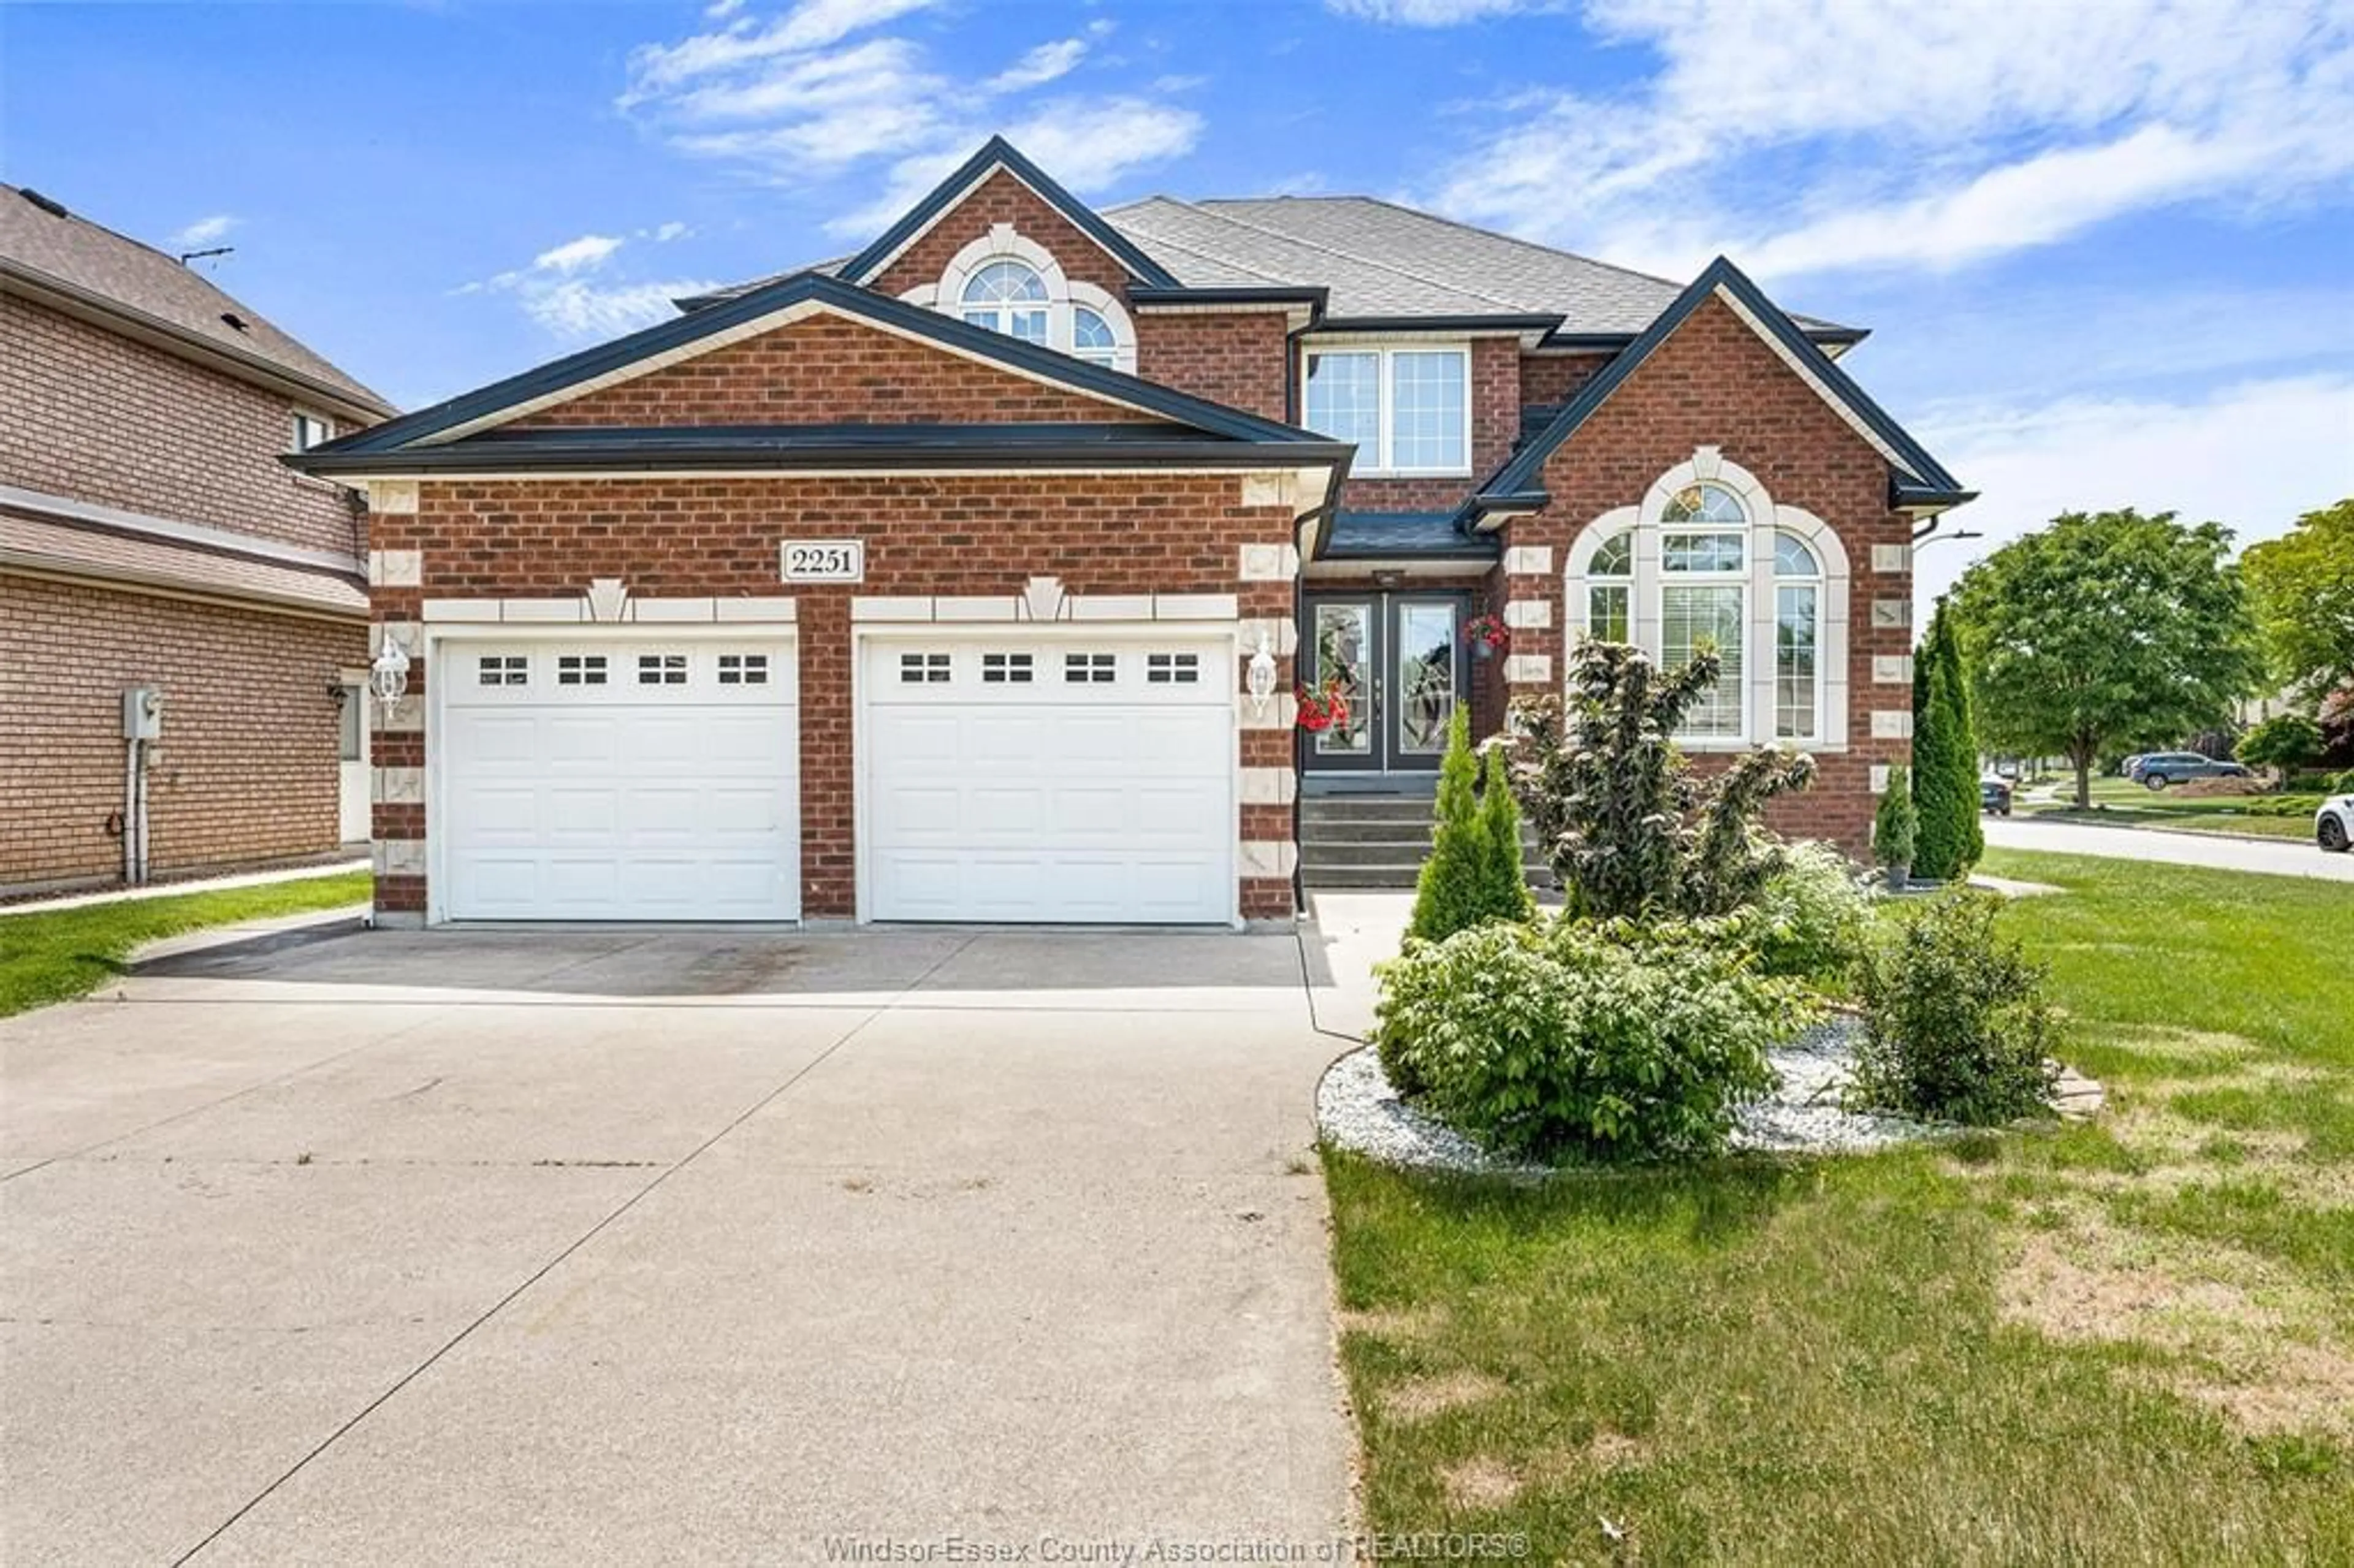 Home with brick exterior material for 2251 DANDURAND Blvd, Windsor Ontario N9E2L2